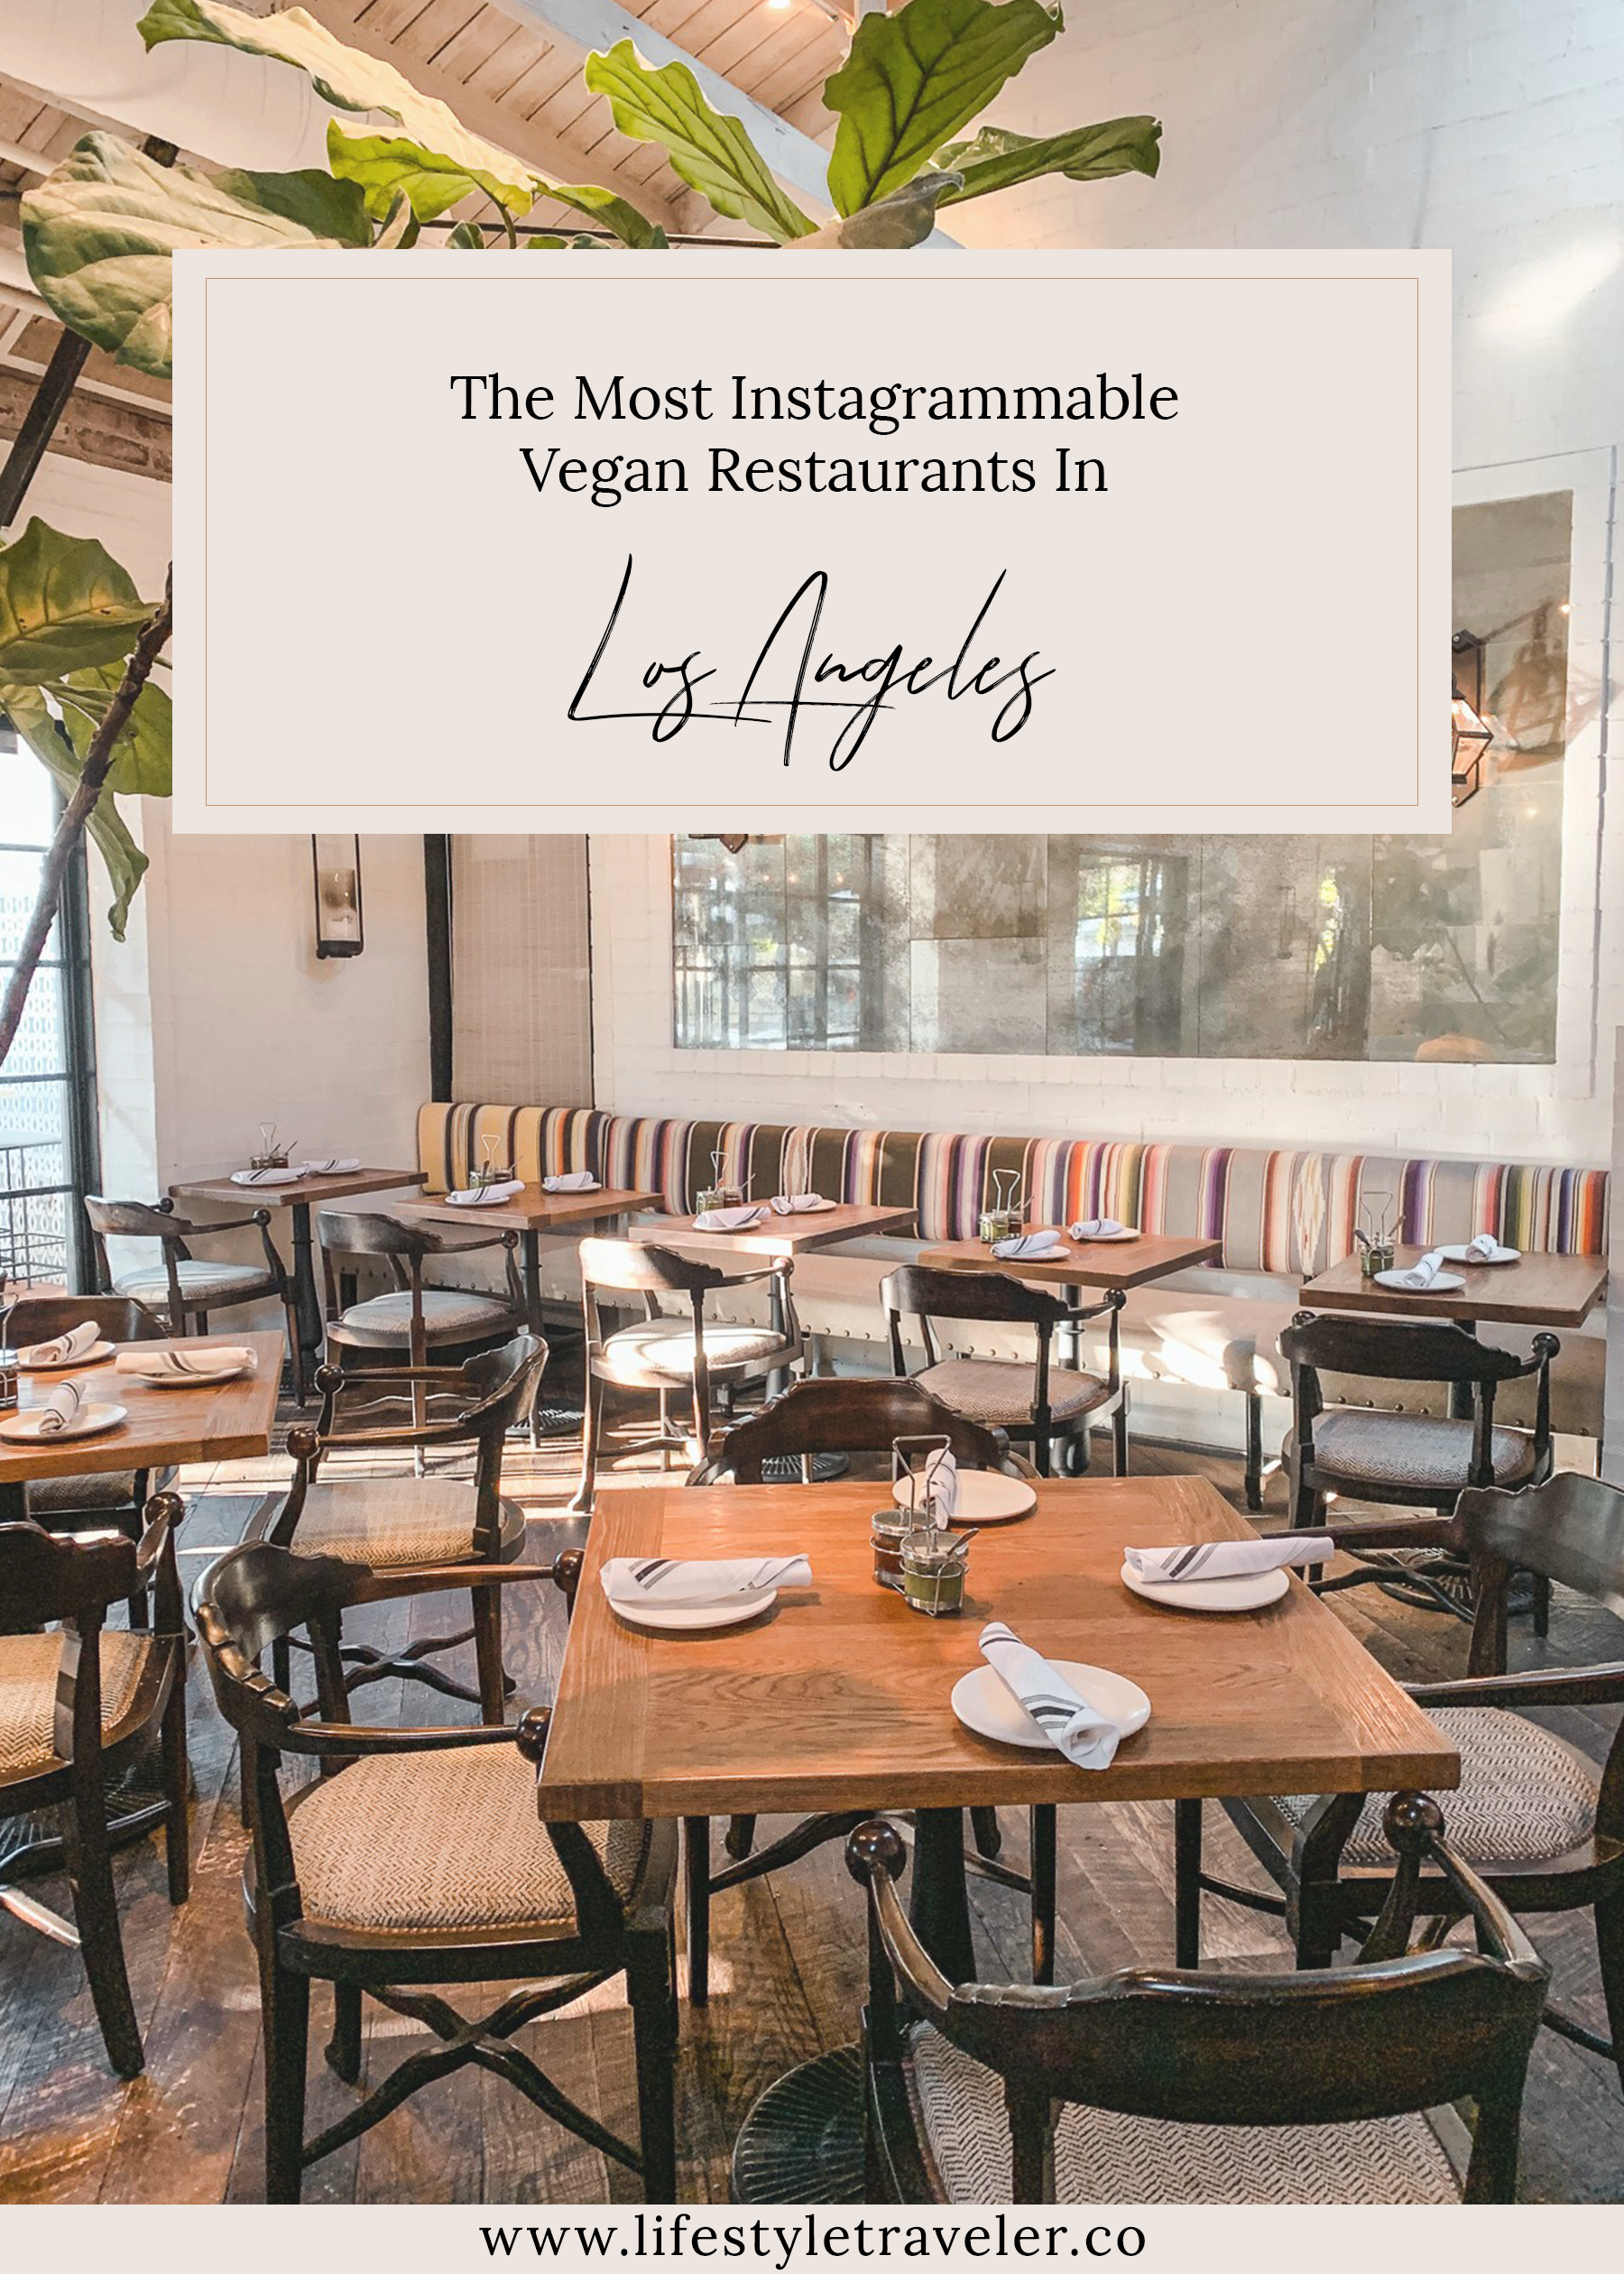 The Most Instagrammable Vegan Cafes In LA | lifestyletraveler.co | IG: @lifestyletraveler.co